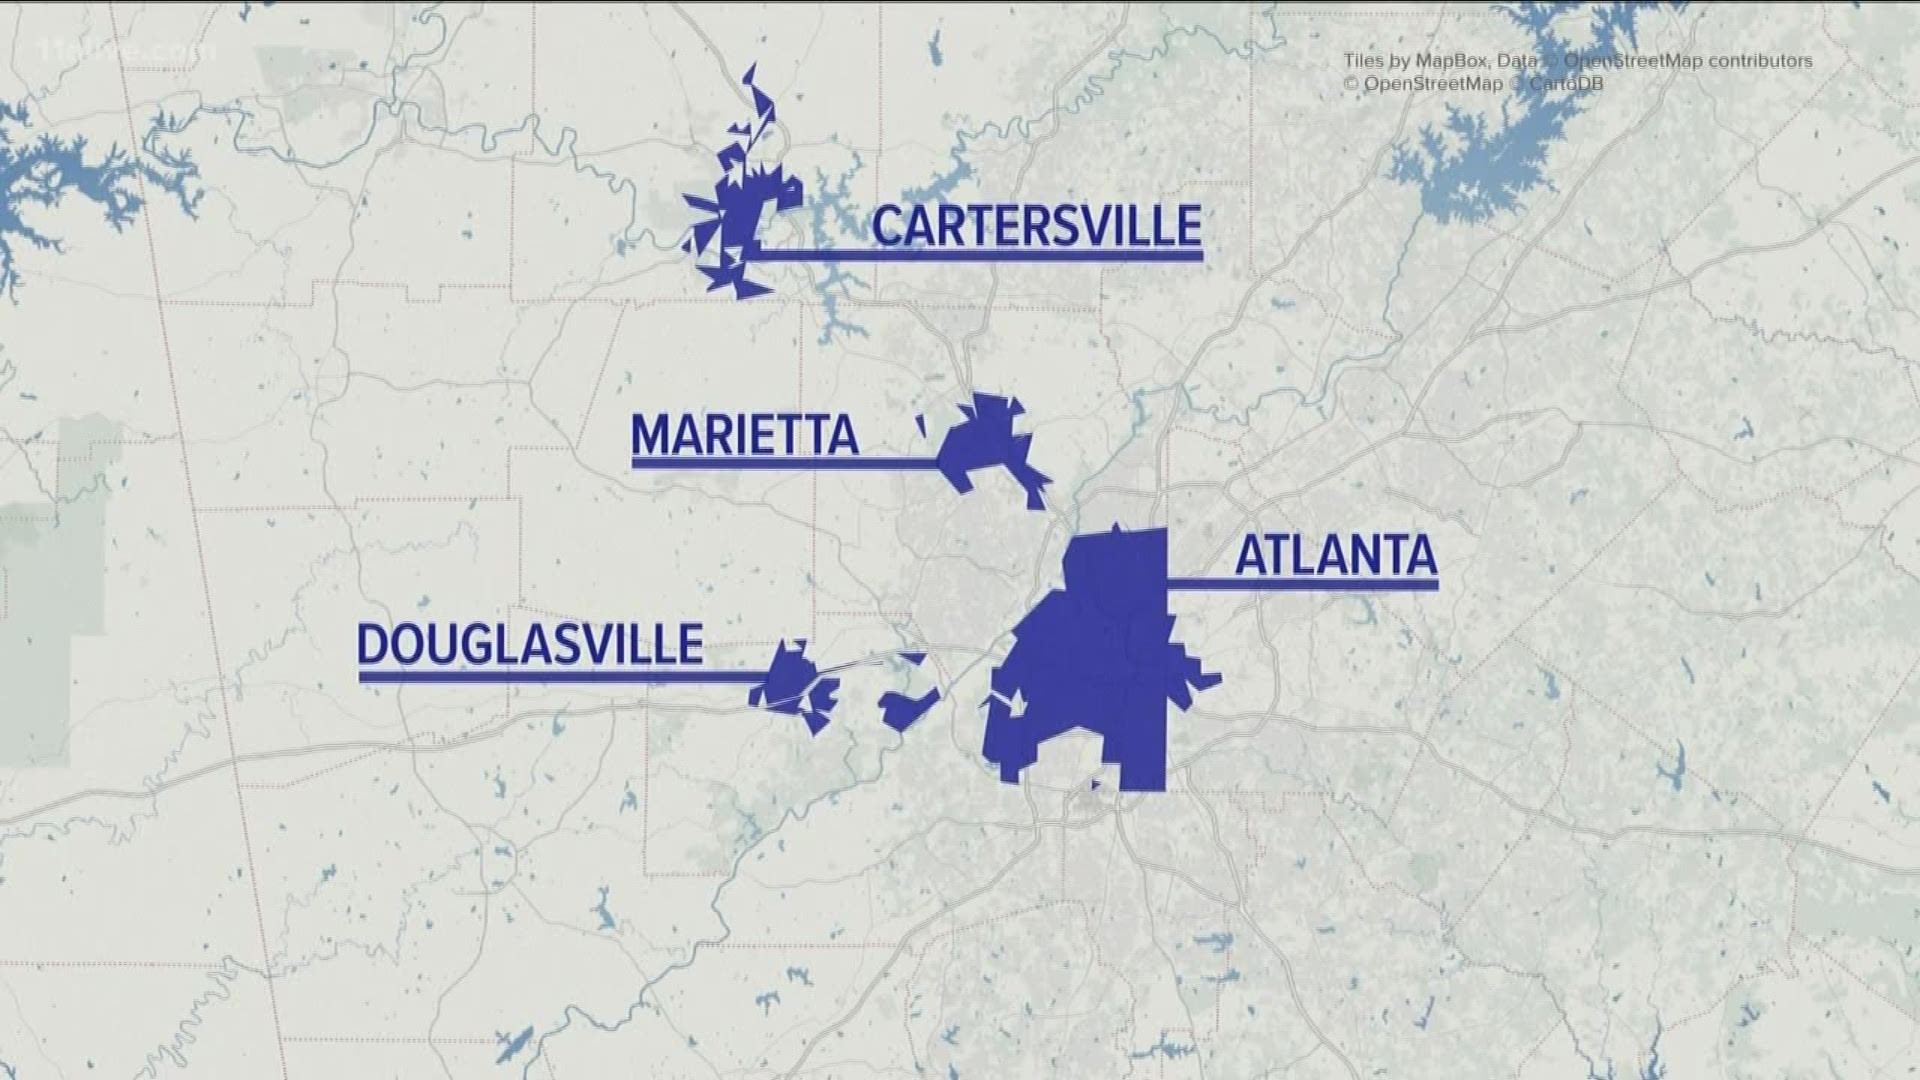 A nonprofit group says it tested water all around metro Atlanta and west Georgia, finding contaminants that could lead to illness. But there's more to the story